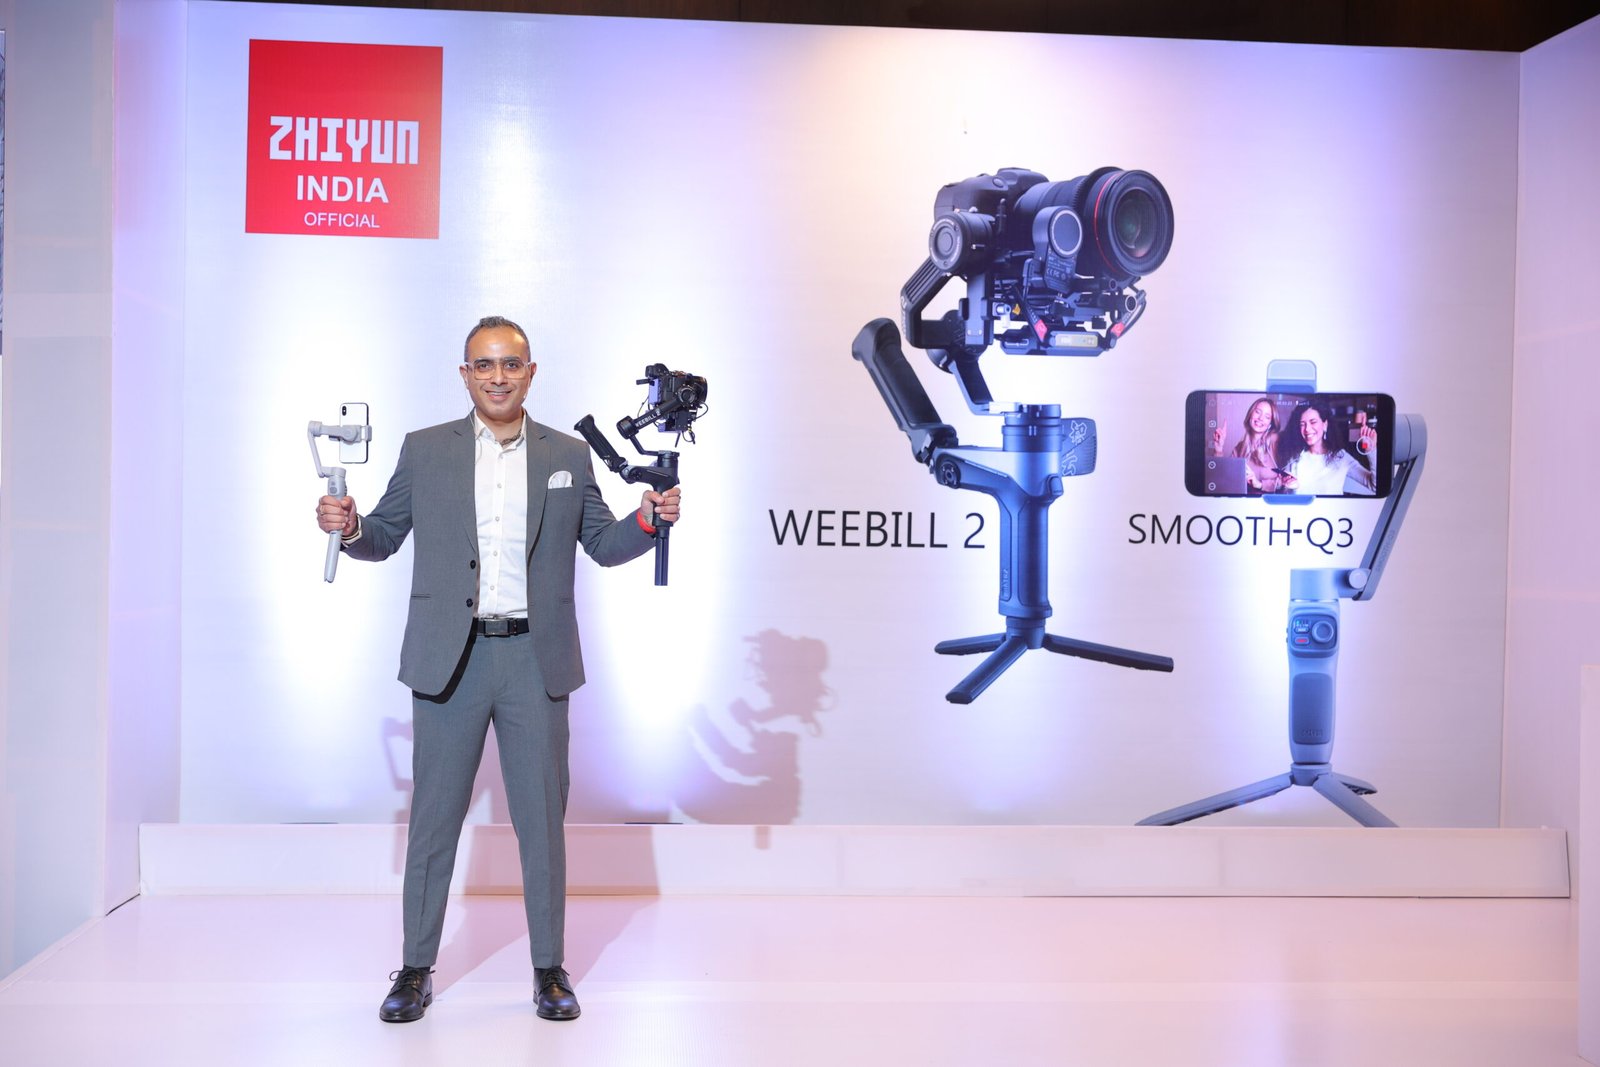 ZHIYUN India launches SMOOTH-Q3 and WEEBILL 2 Gimbal